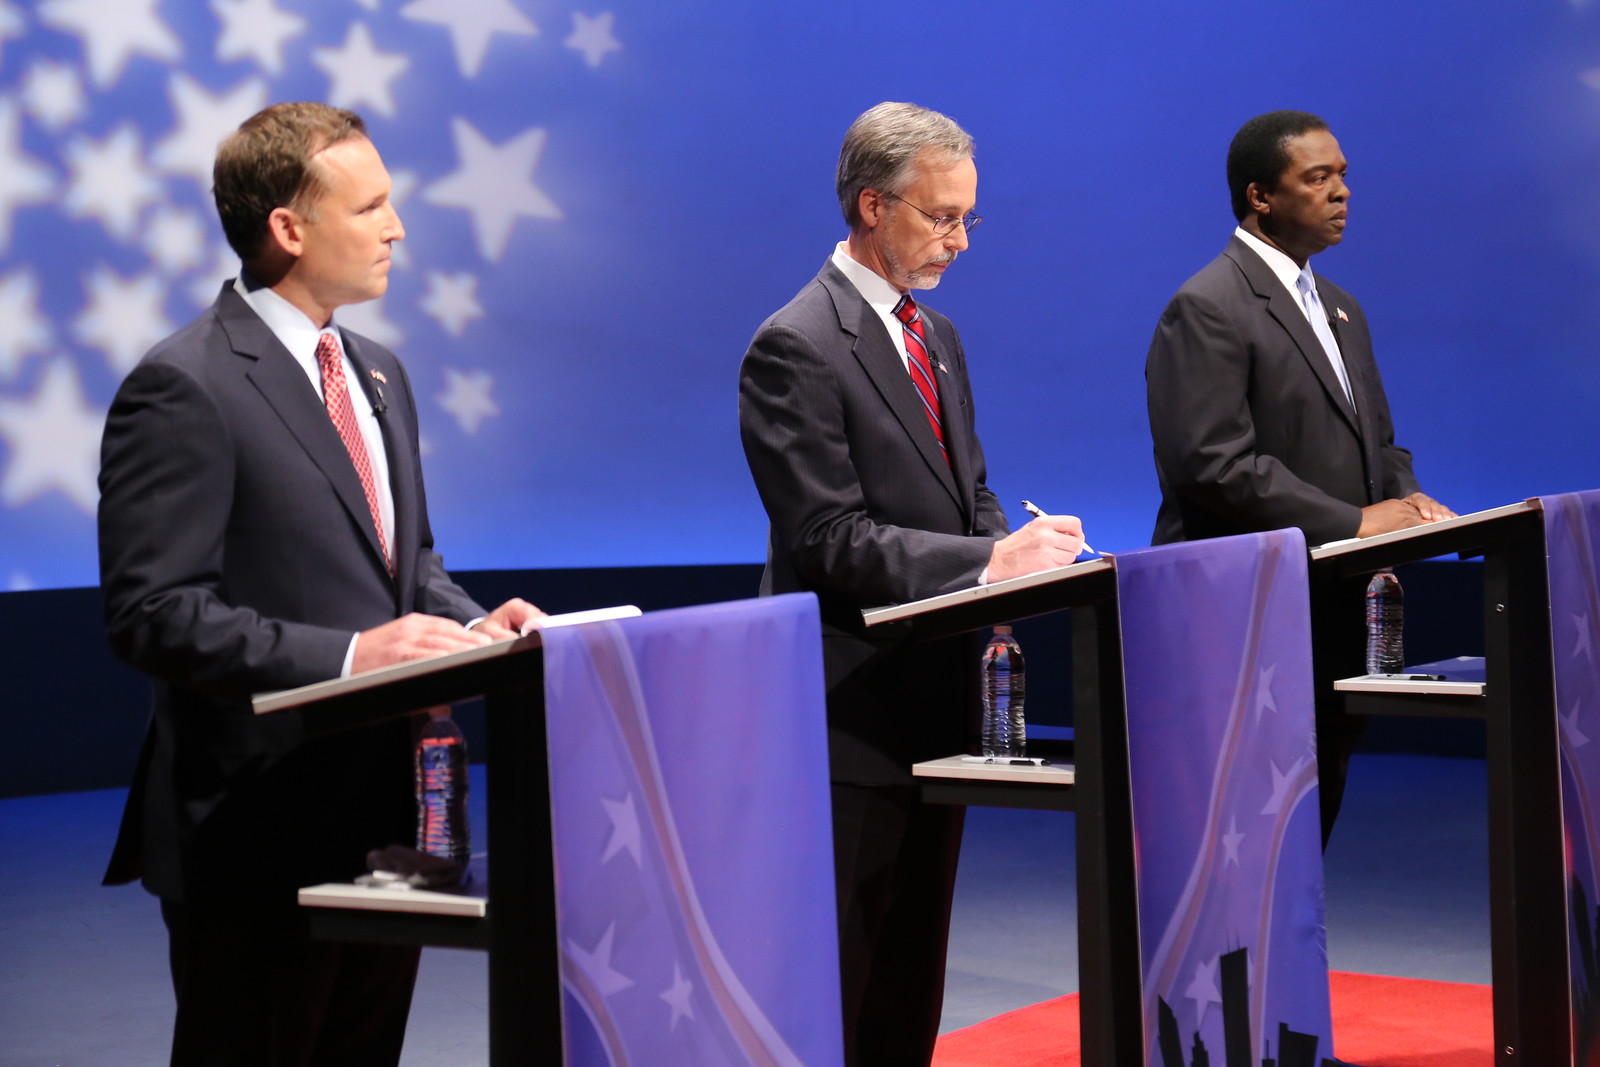 Jacksonville Mayoral Candidates Face Off In First Televised Debate